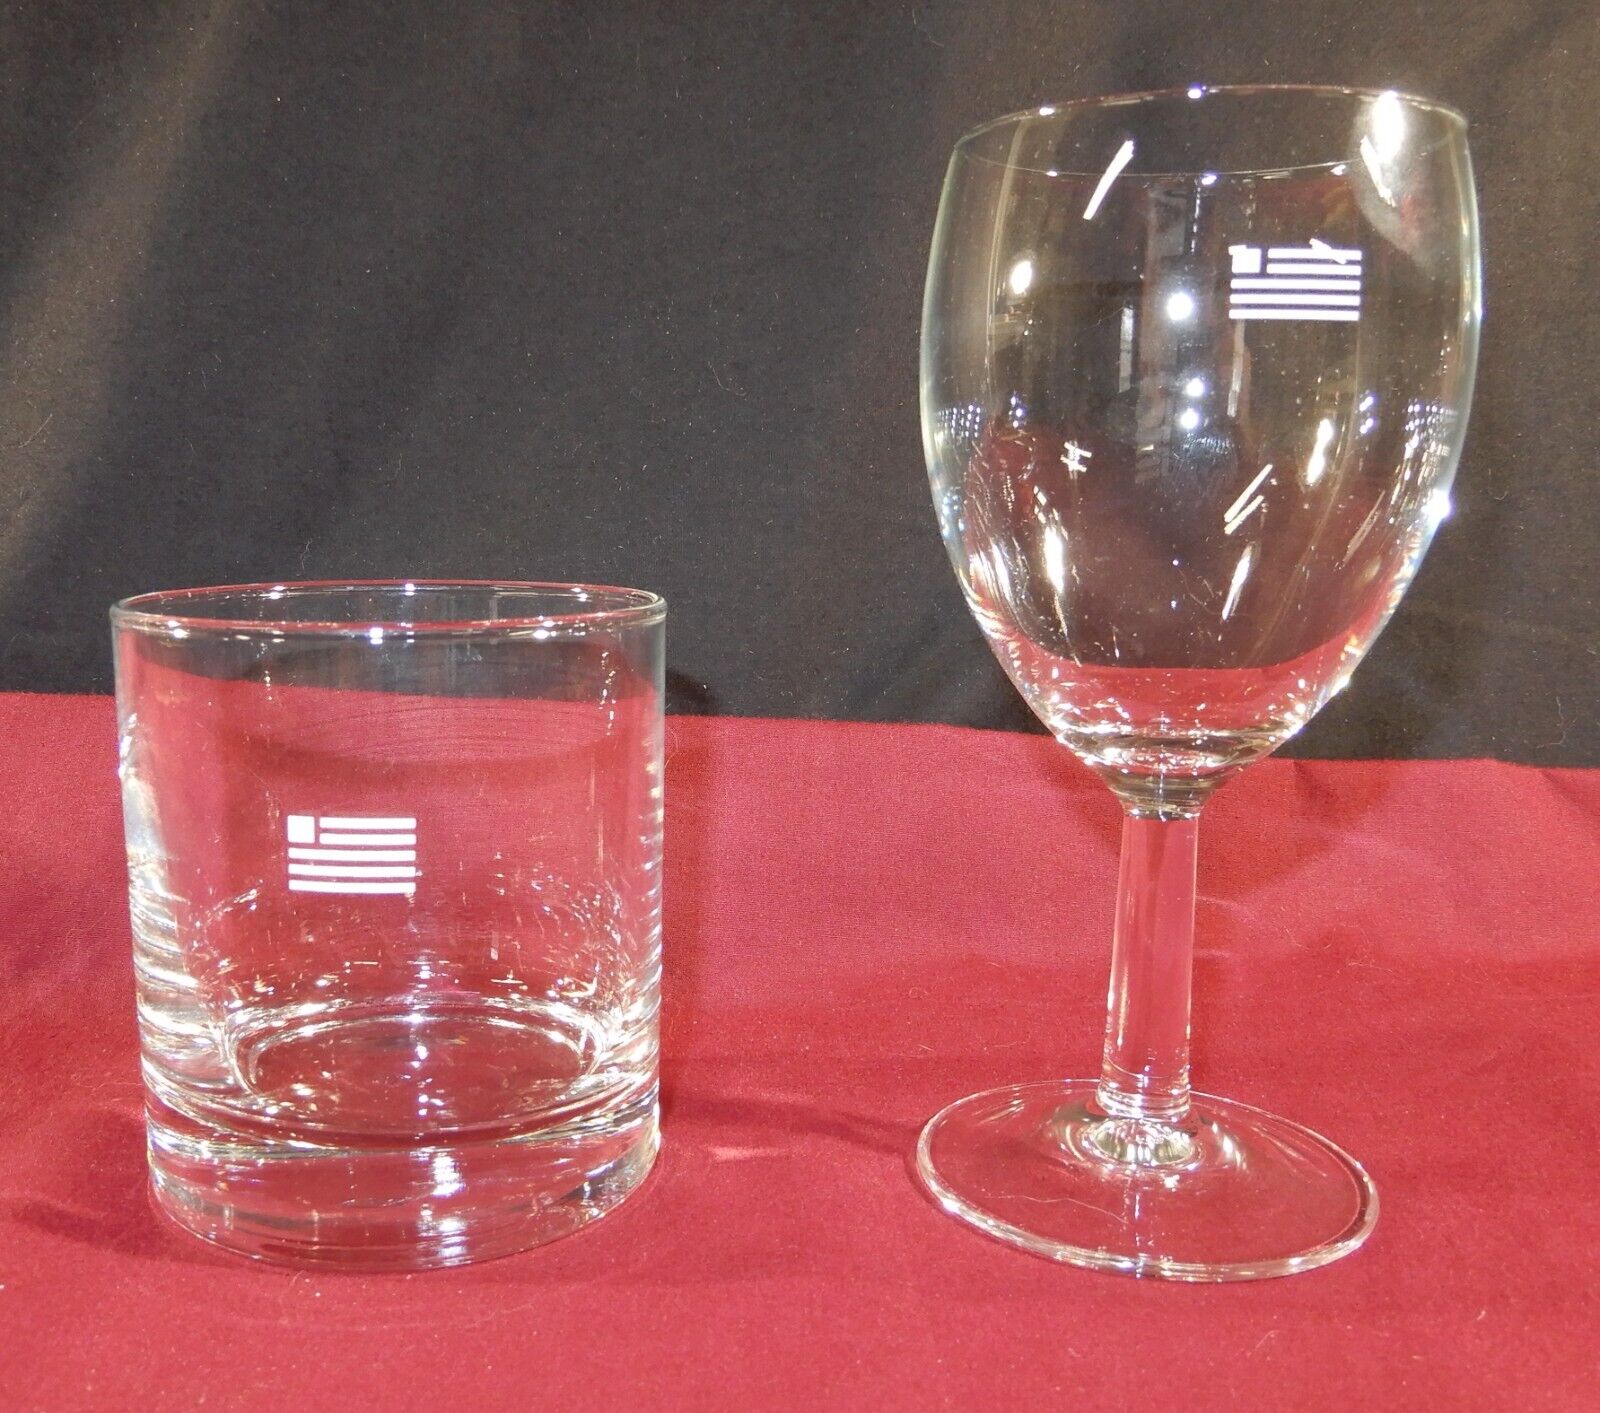 2 Business Class Glasses from US Airways (Envoy Class)